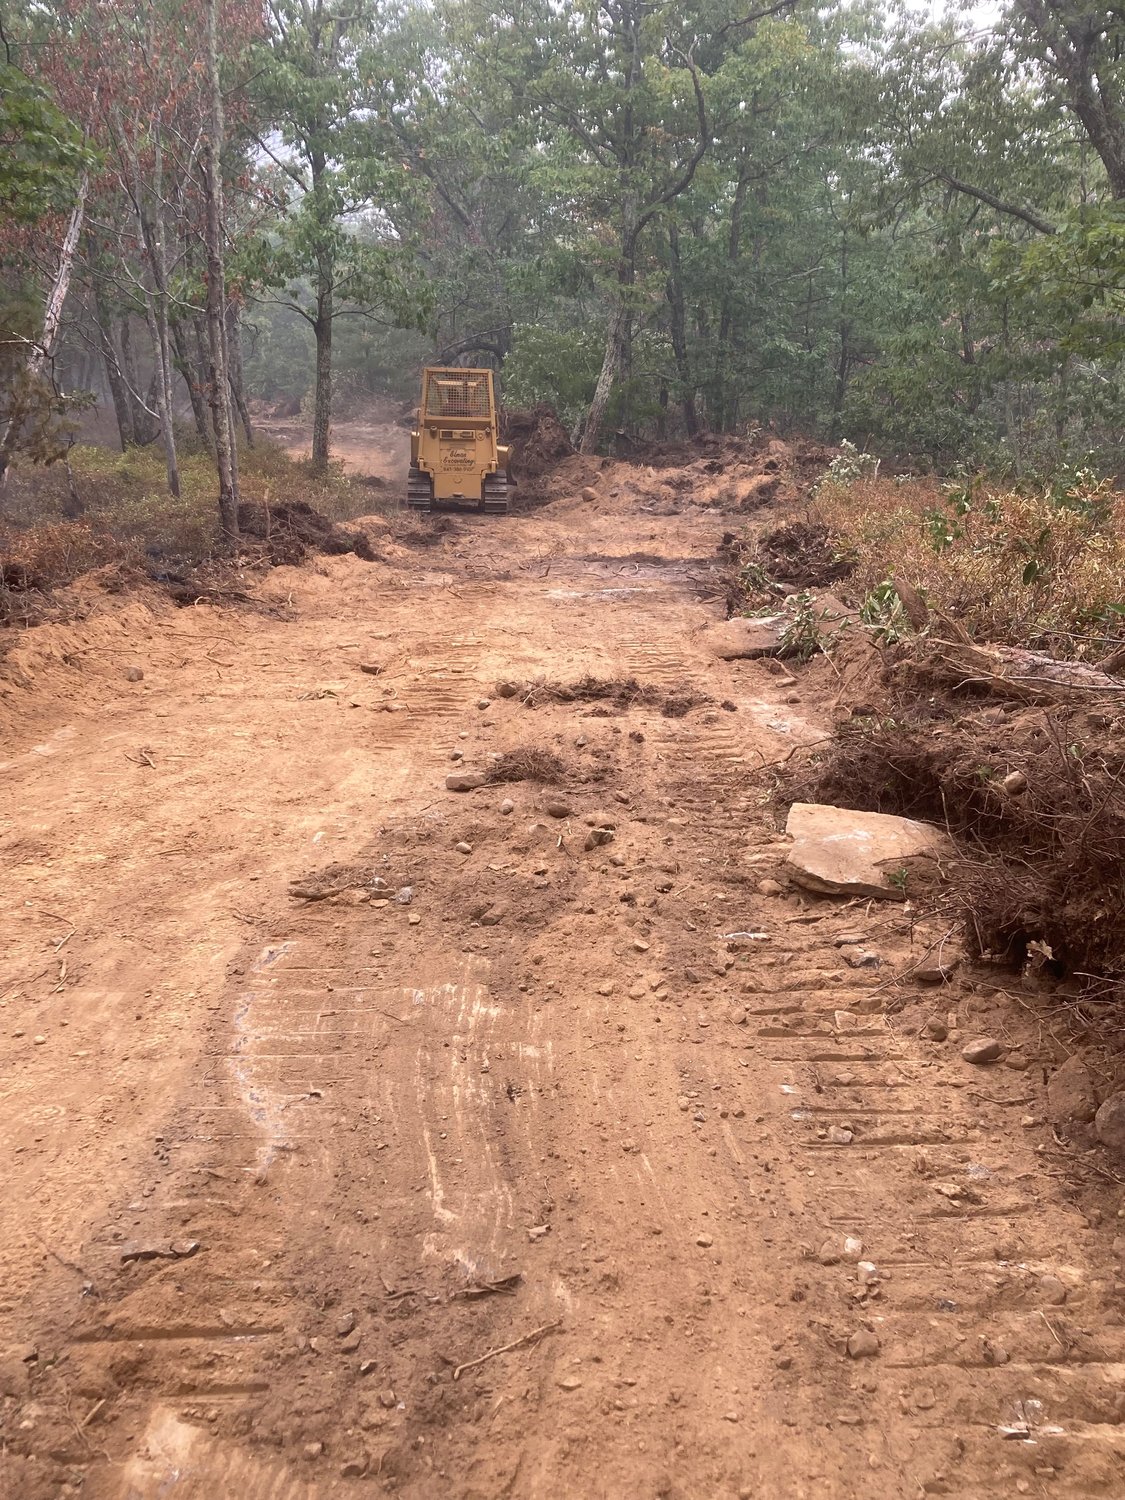 Rangers worked with multiple fire departments to install a fire line with a bulldozer, battling a fire on private lands in the Town of Mamakating the weekend of August 27.